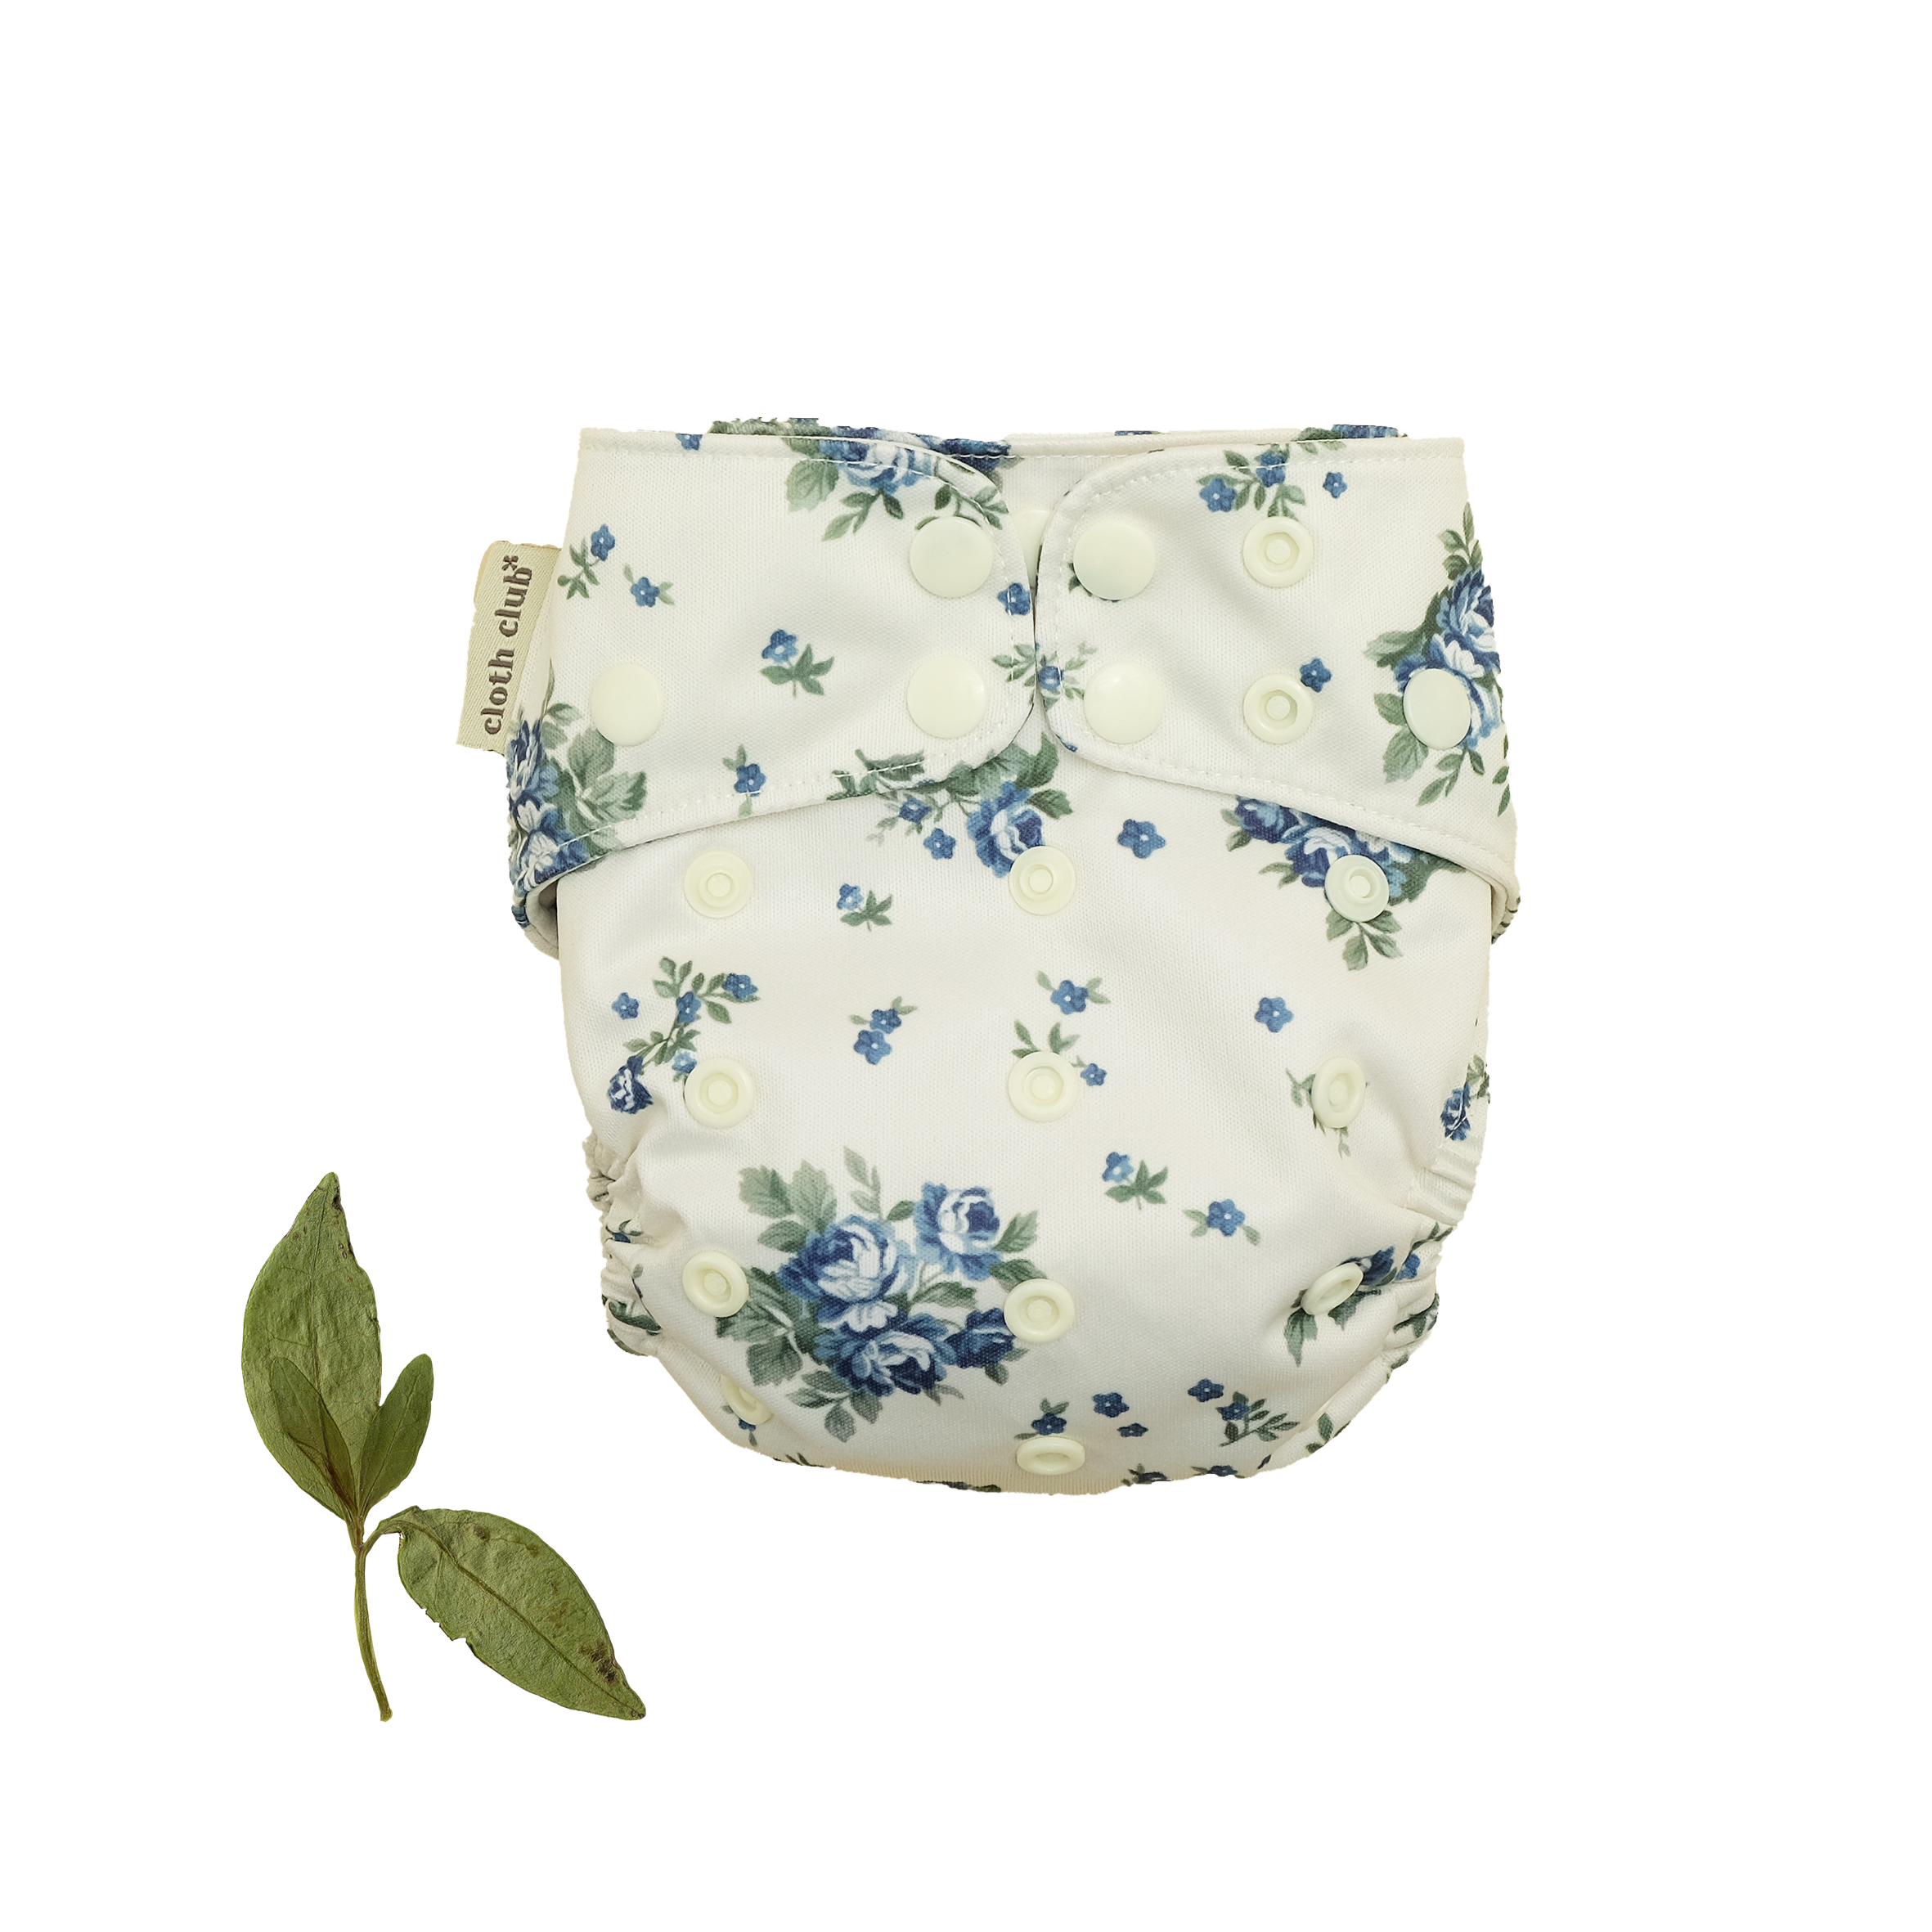 'Roses in Blue'm' is a stunning, not-strictly feminine, floral print with a vintage feel. It features an ivory background that showcases a bouquet of hand-illustrated blue roses with sage green leaves.. Cloth Club Reusable Nappies